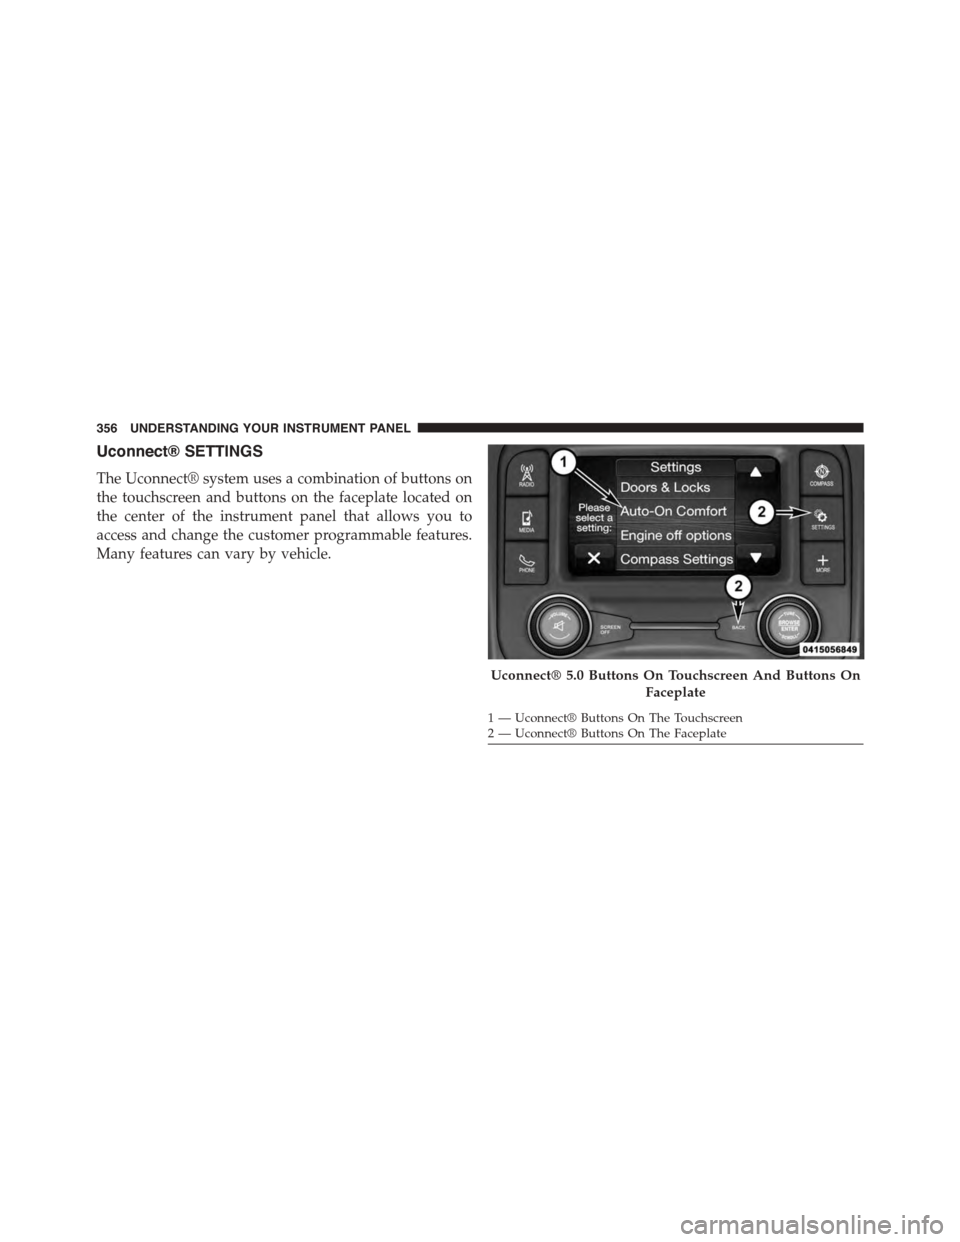 Ram 1500 2015 Owners Guide Uconnect® SETTINGS
The Uconnect® system uses a combination of buttons on
the touchscreen and buttons on the faceplate located on
the center of the instrument panel that allows you to
access and chan